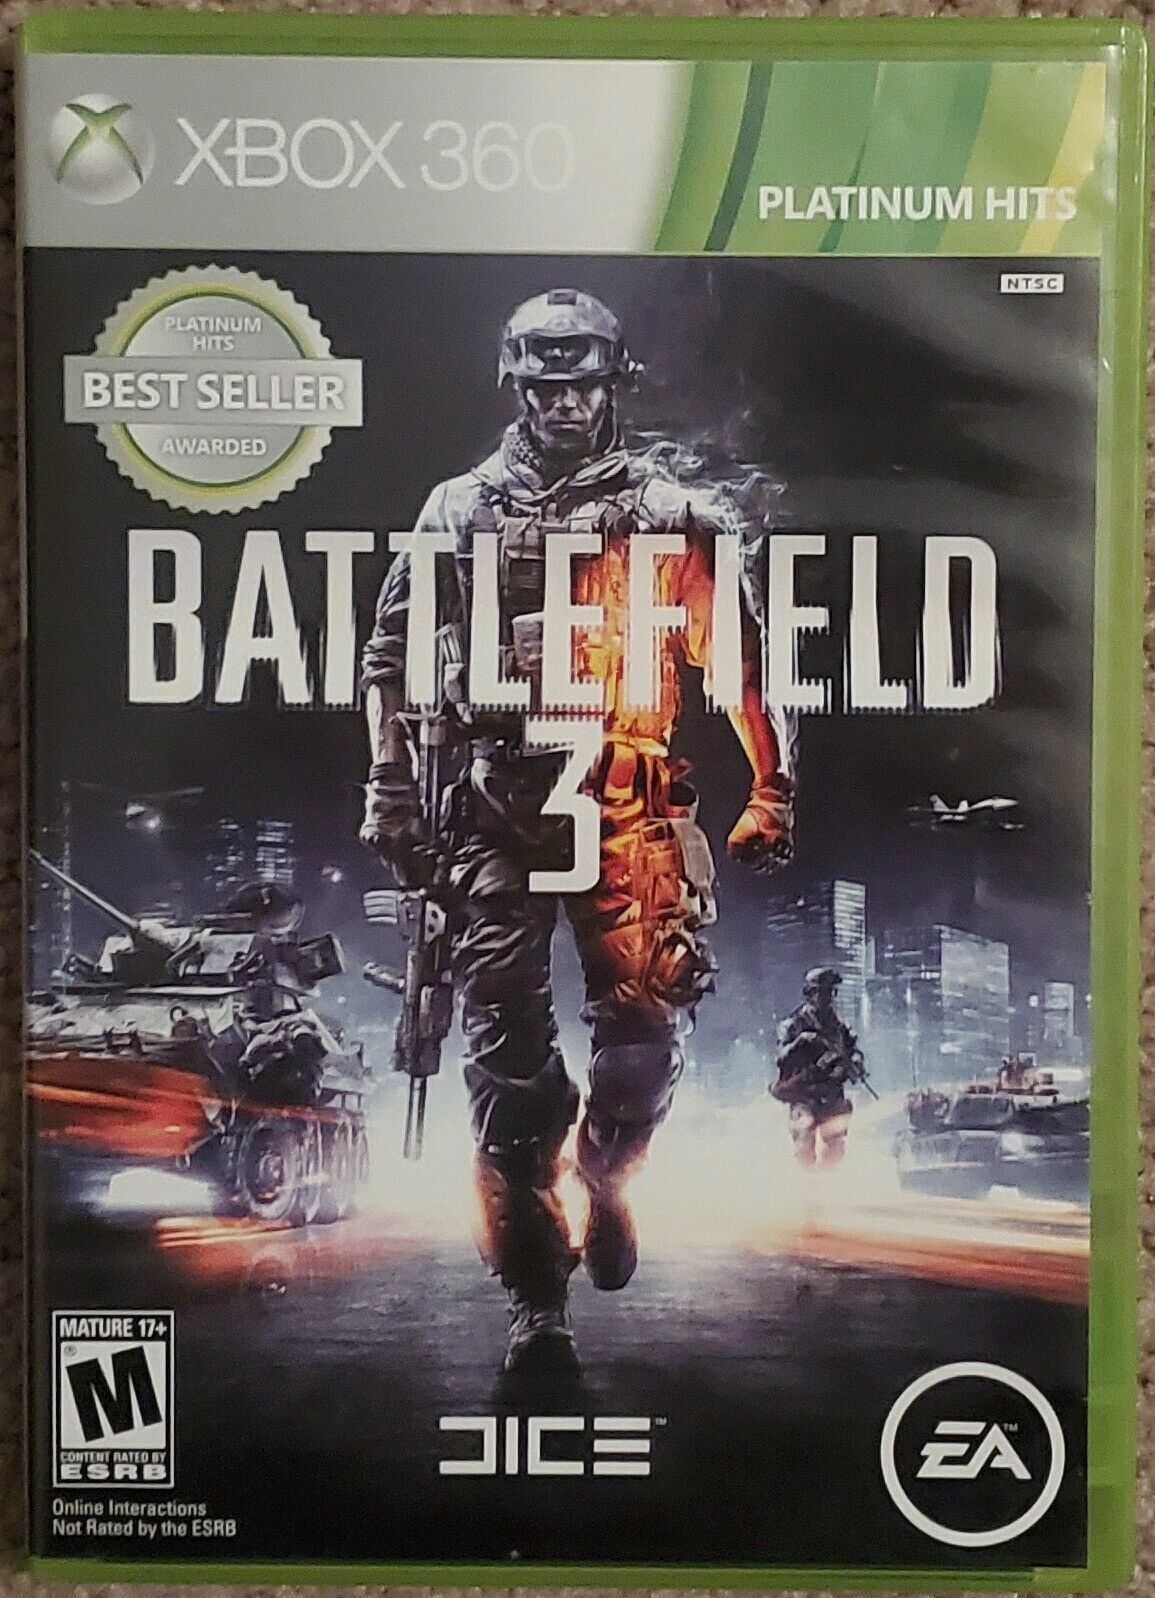 eel slot pace Battlefield 3 PLATINUM HITS (Microsoft Xbox 360) GAME DISCS & CASE FAST  SHIPPING 14633197372 | eBay